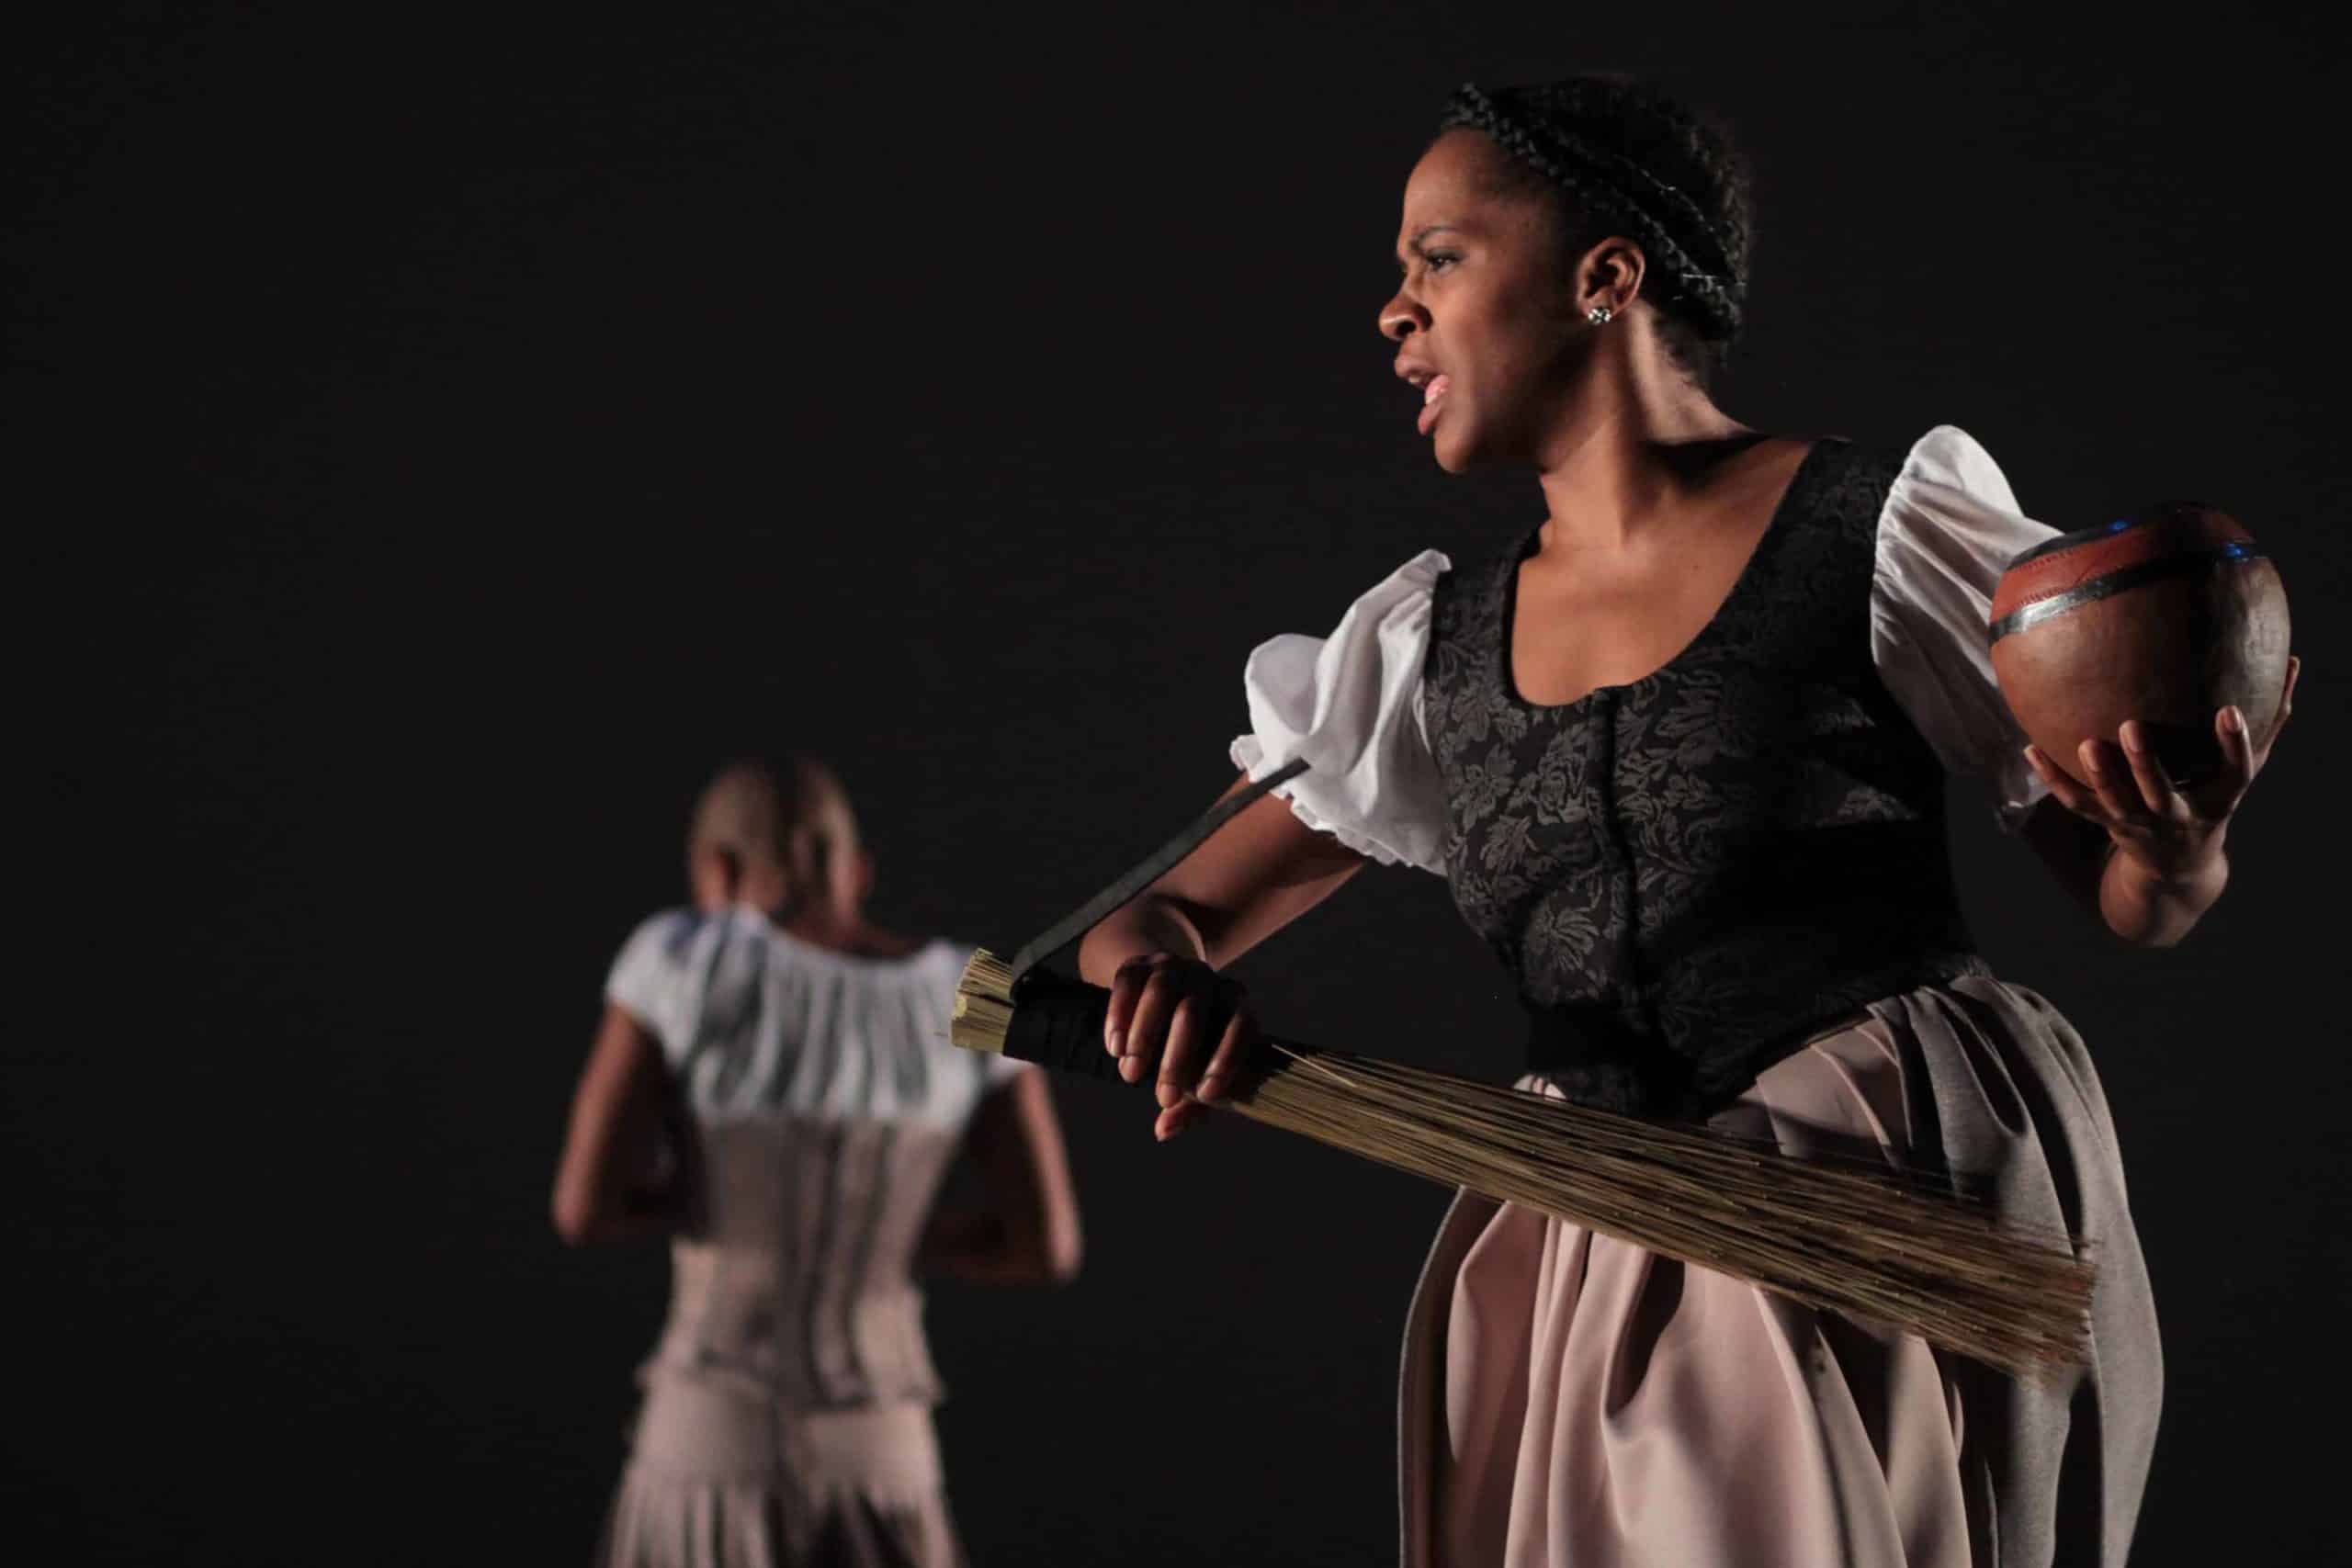 Dada Masilo's company of South African dancers performed her re-imagined Giselle at Williams College.